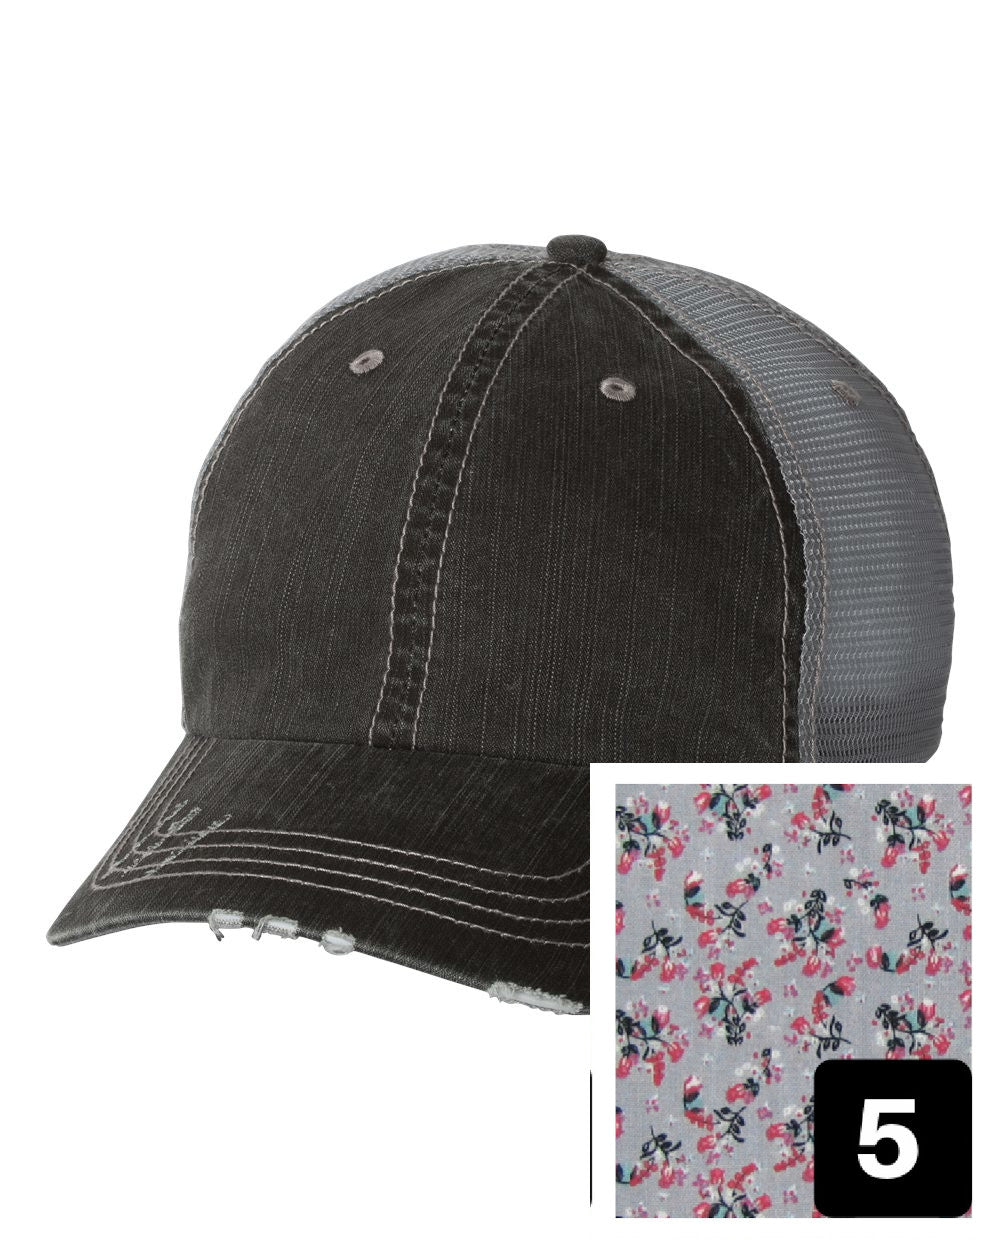 gray distressed trucker hat with purple and pink floral fabric state of California